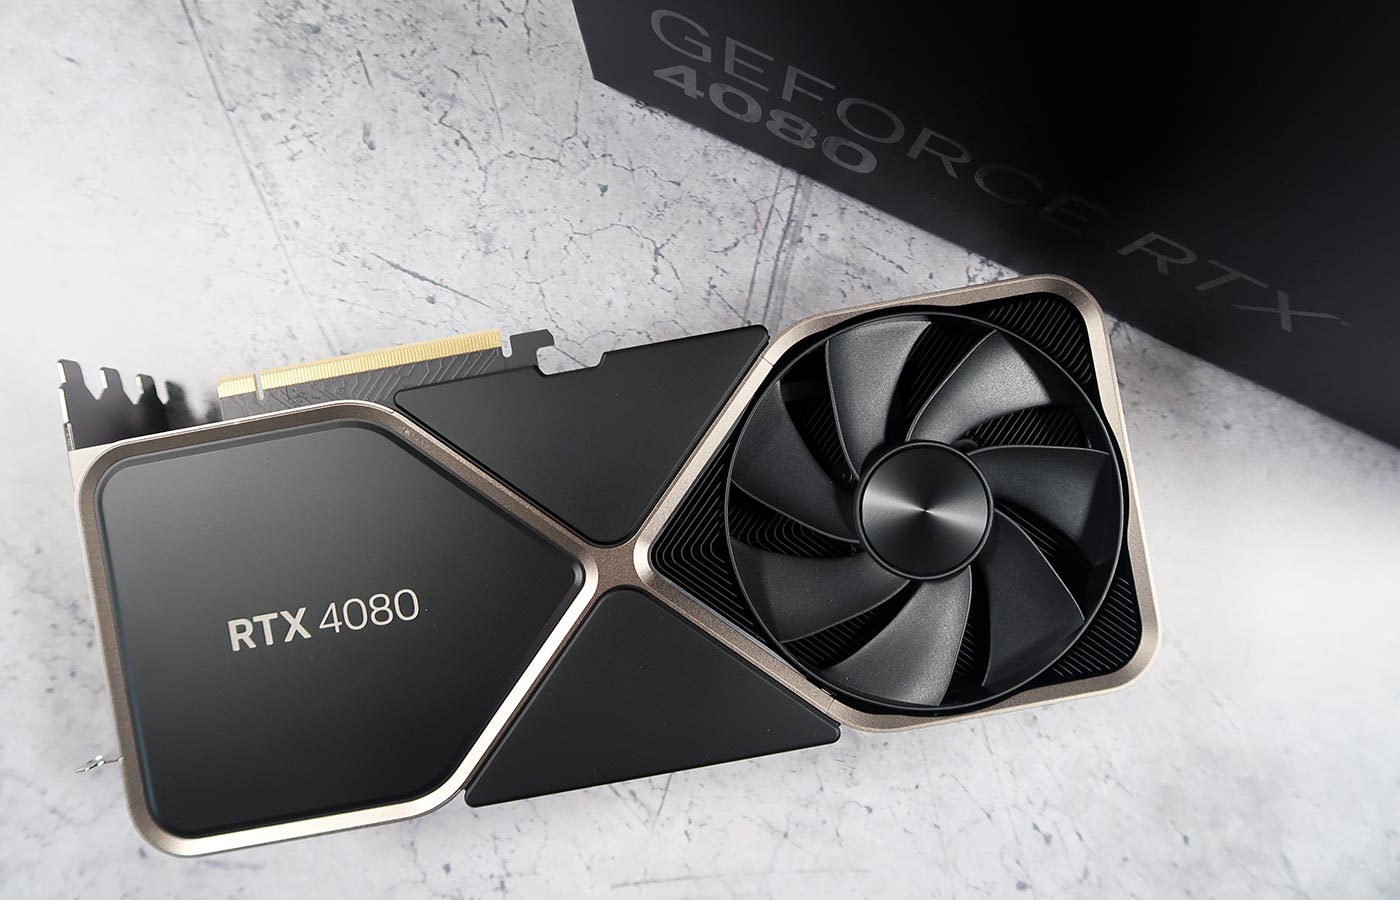 Nvidia GeForce RTX 4080 Founders Edition